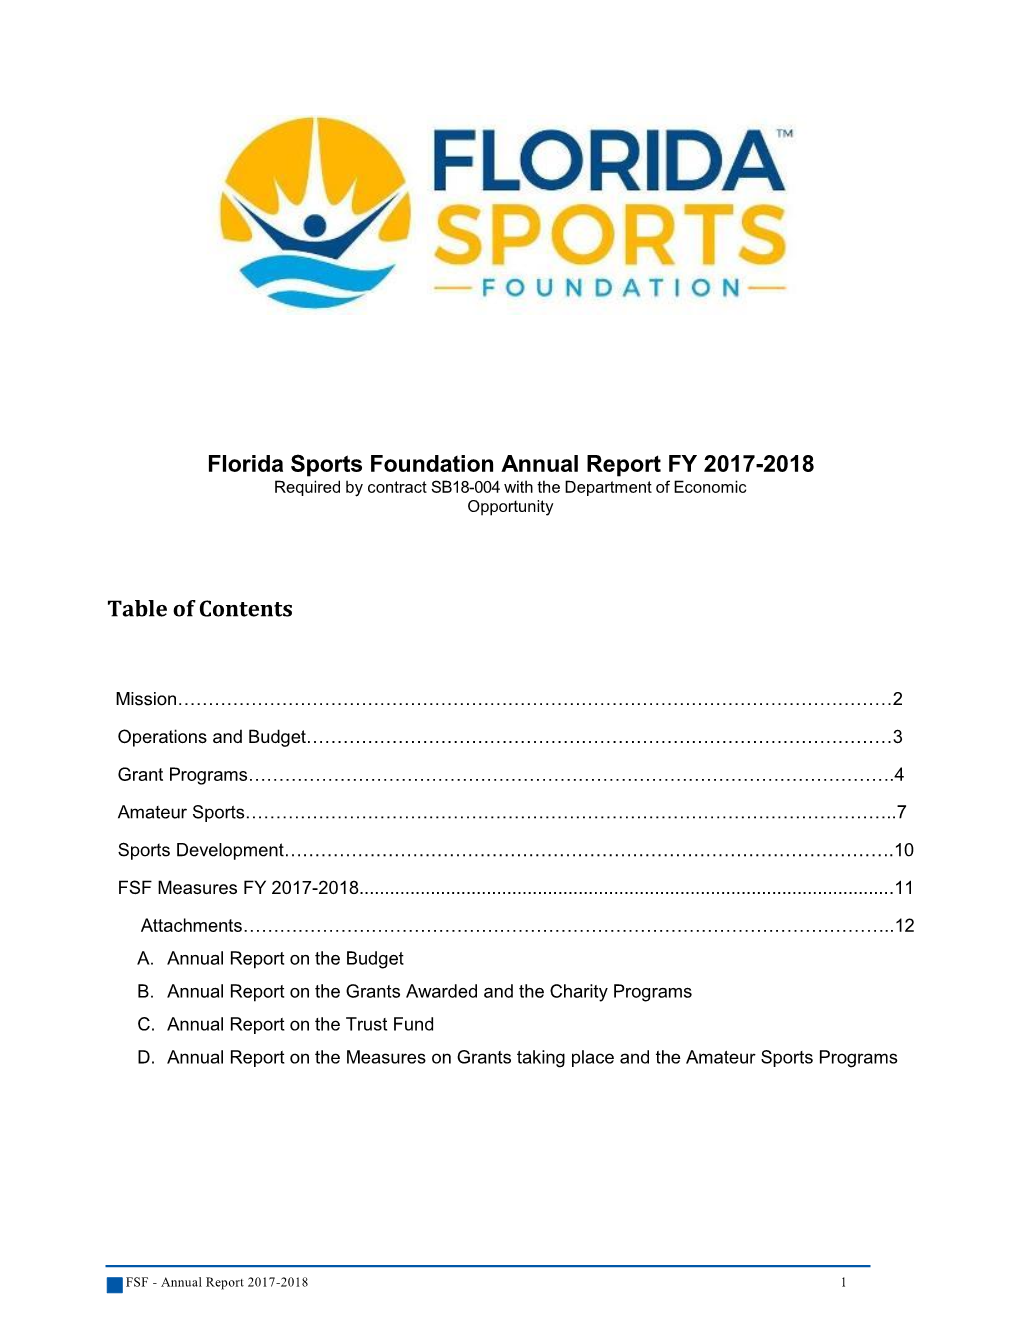 Florida Sports Foundation Annual Report FY 2017-2018 Table of Contents